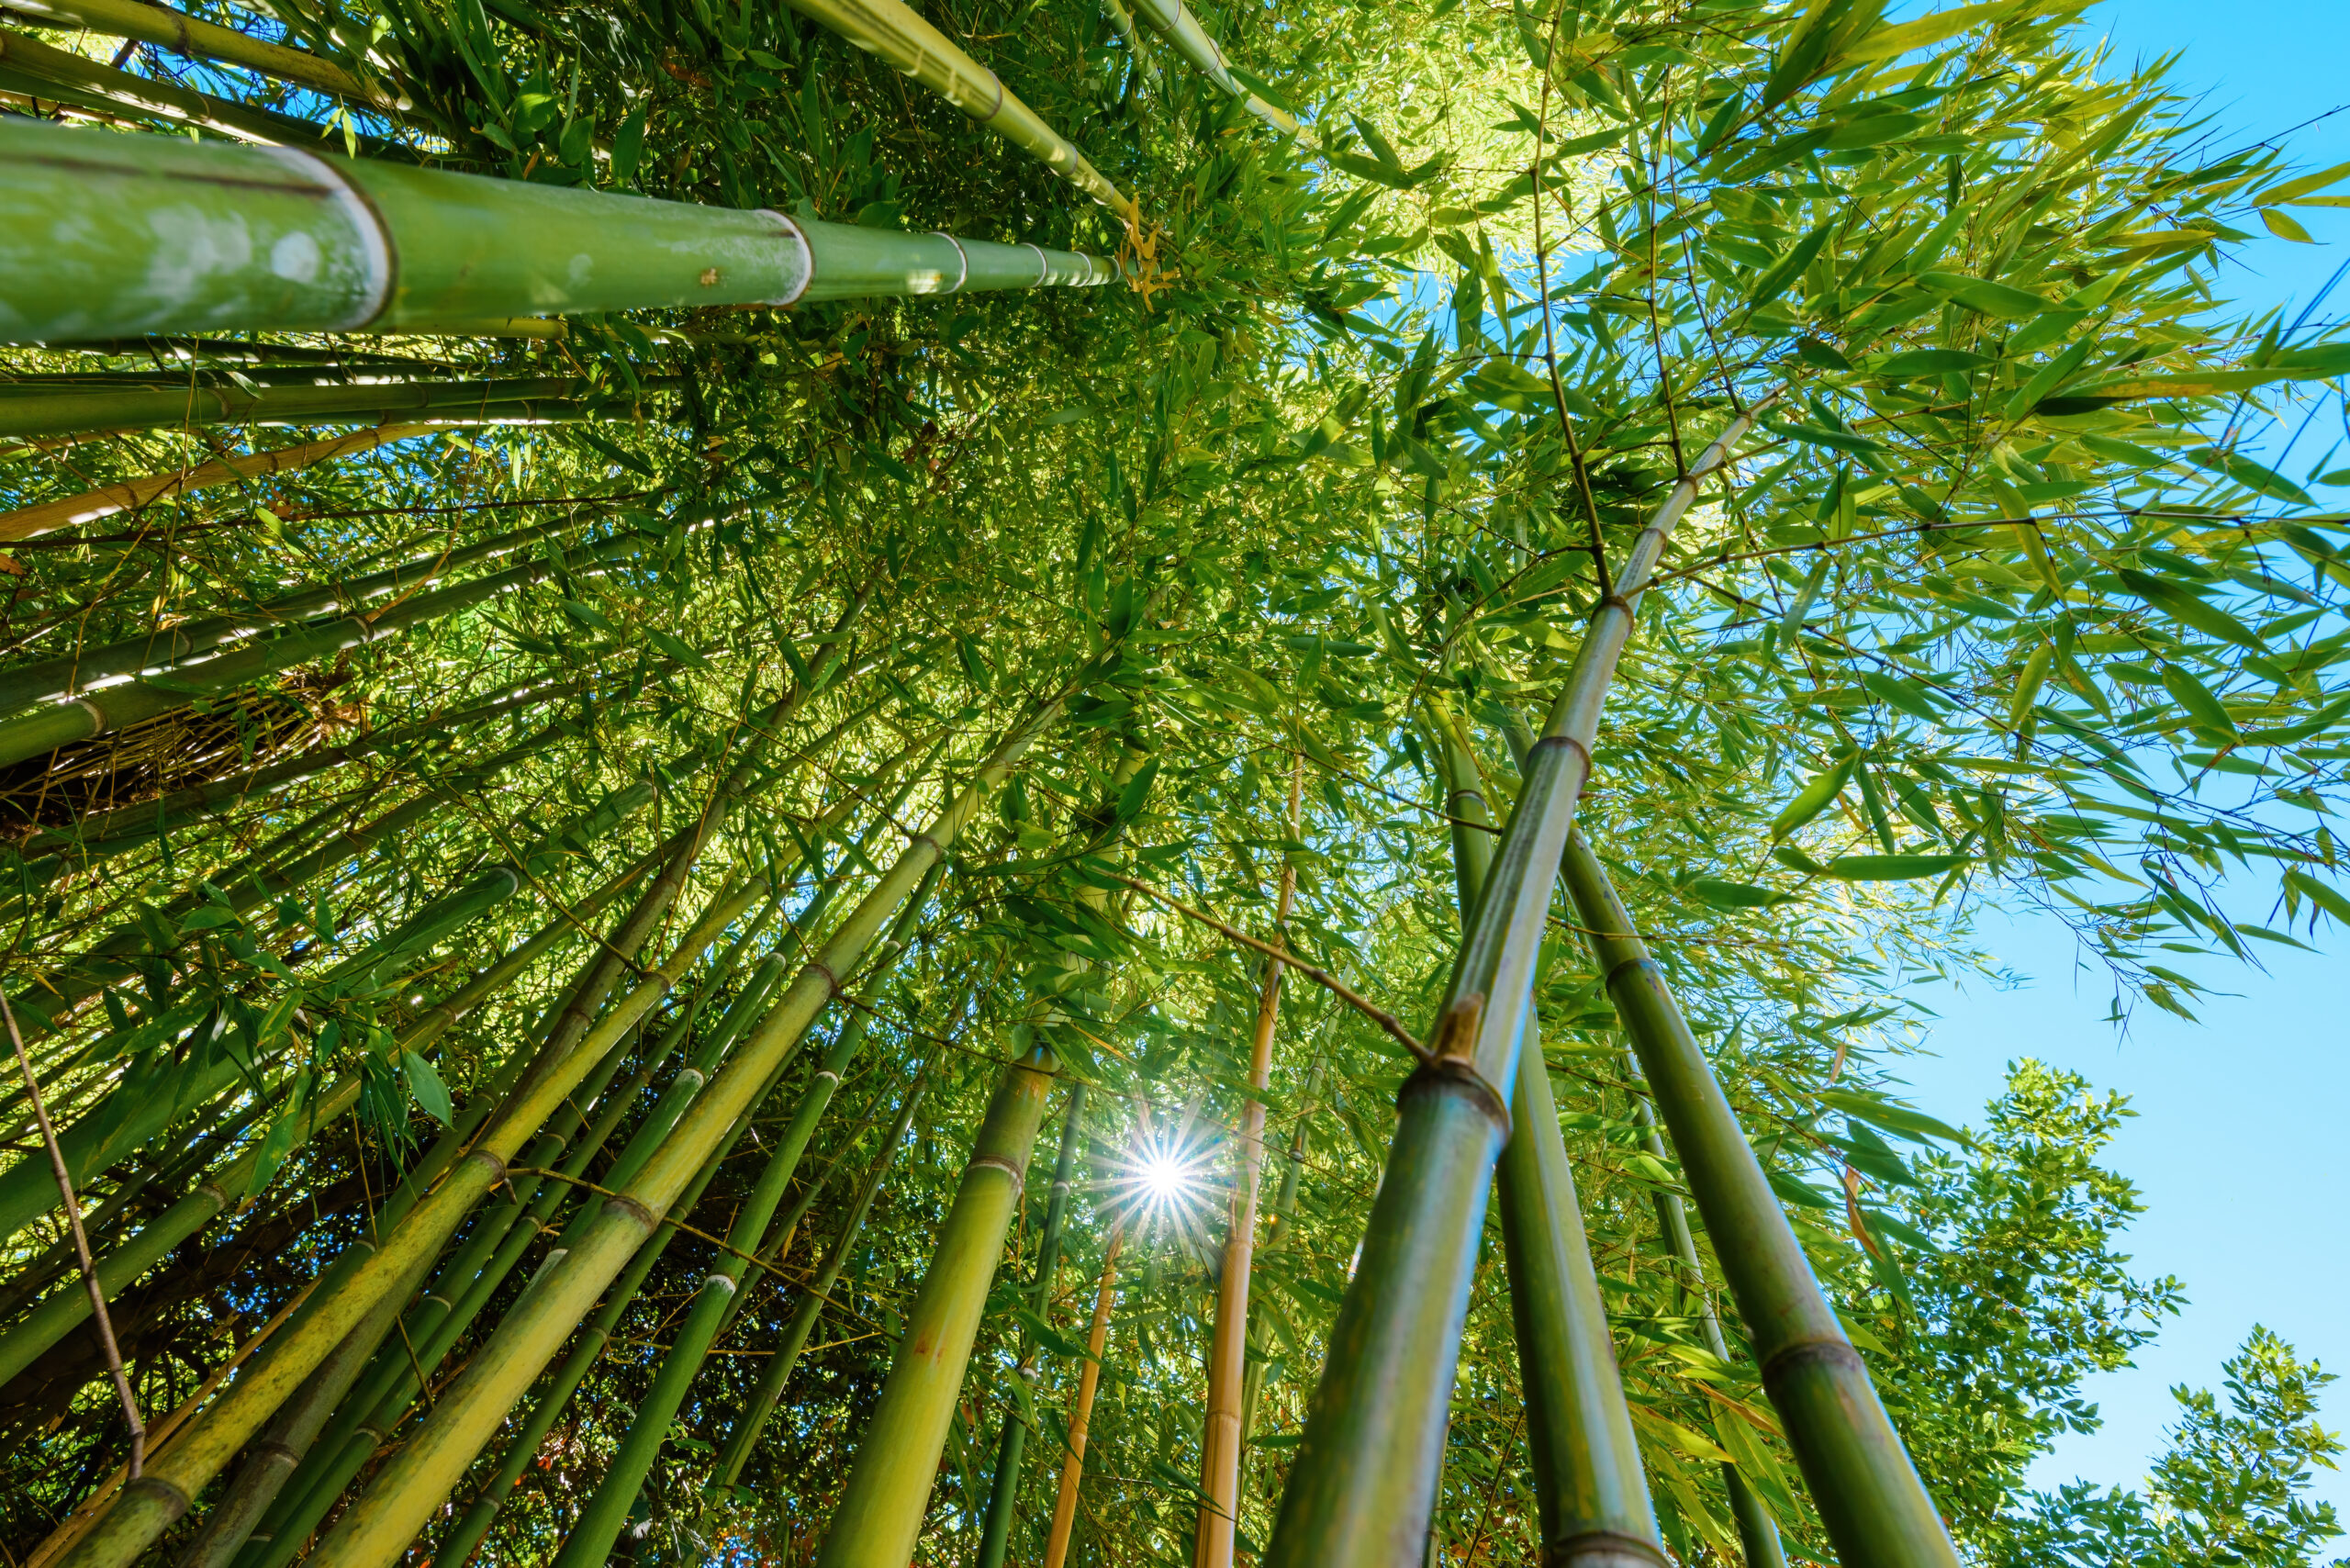 How to get professional bamboo removal services in Haddon Township, NJ?